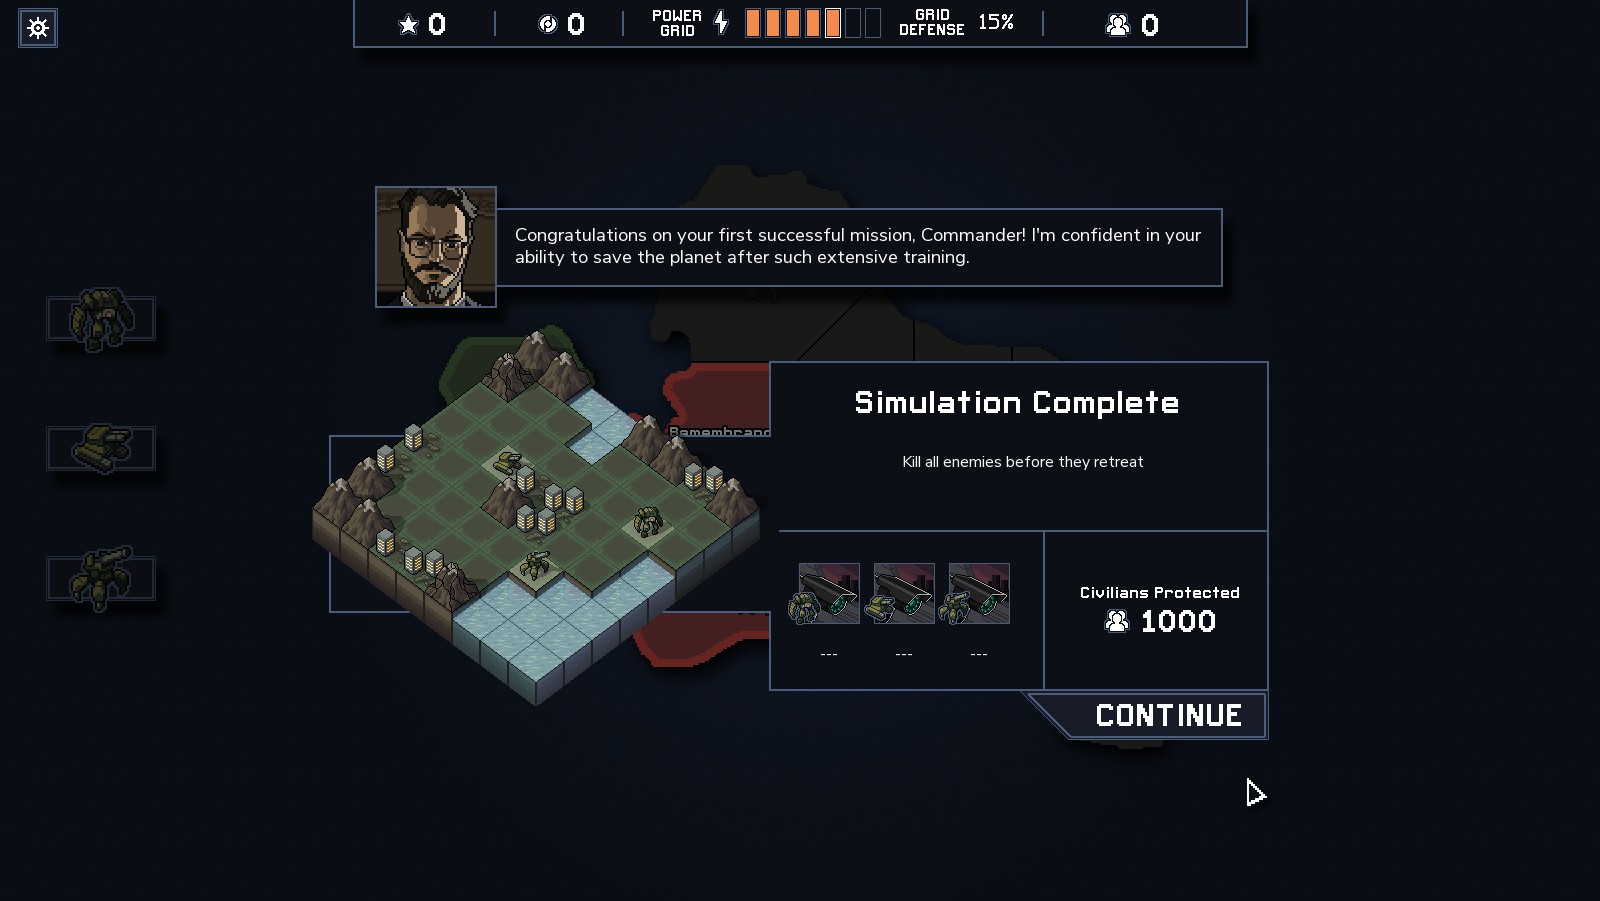 The simulation complete screen in Into the Breach shows a man in glasses congratulating the player on completing the mission